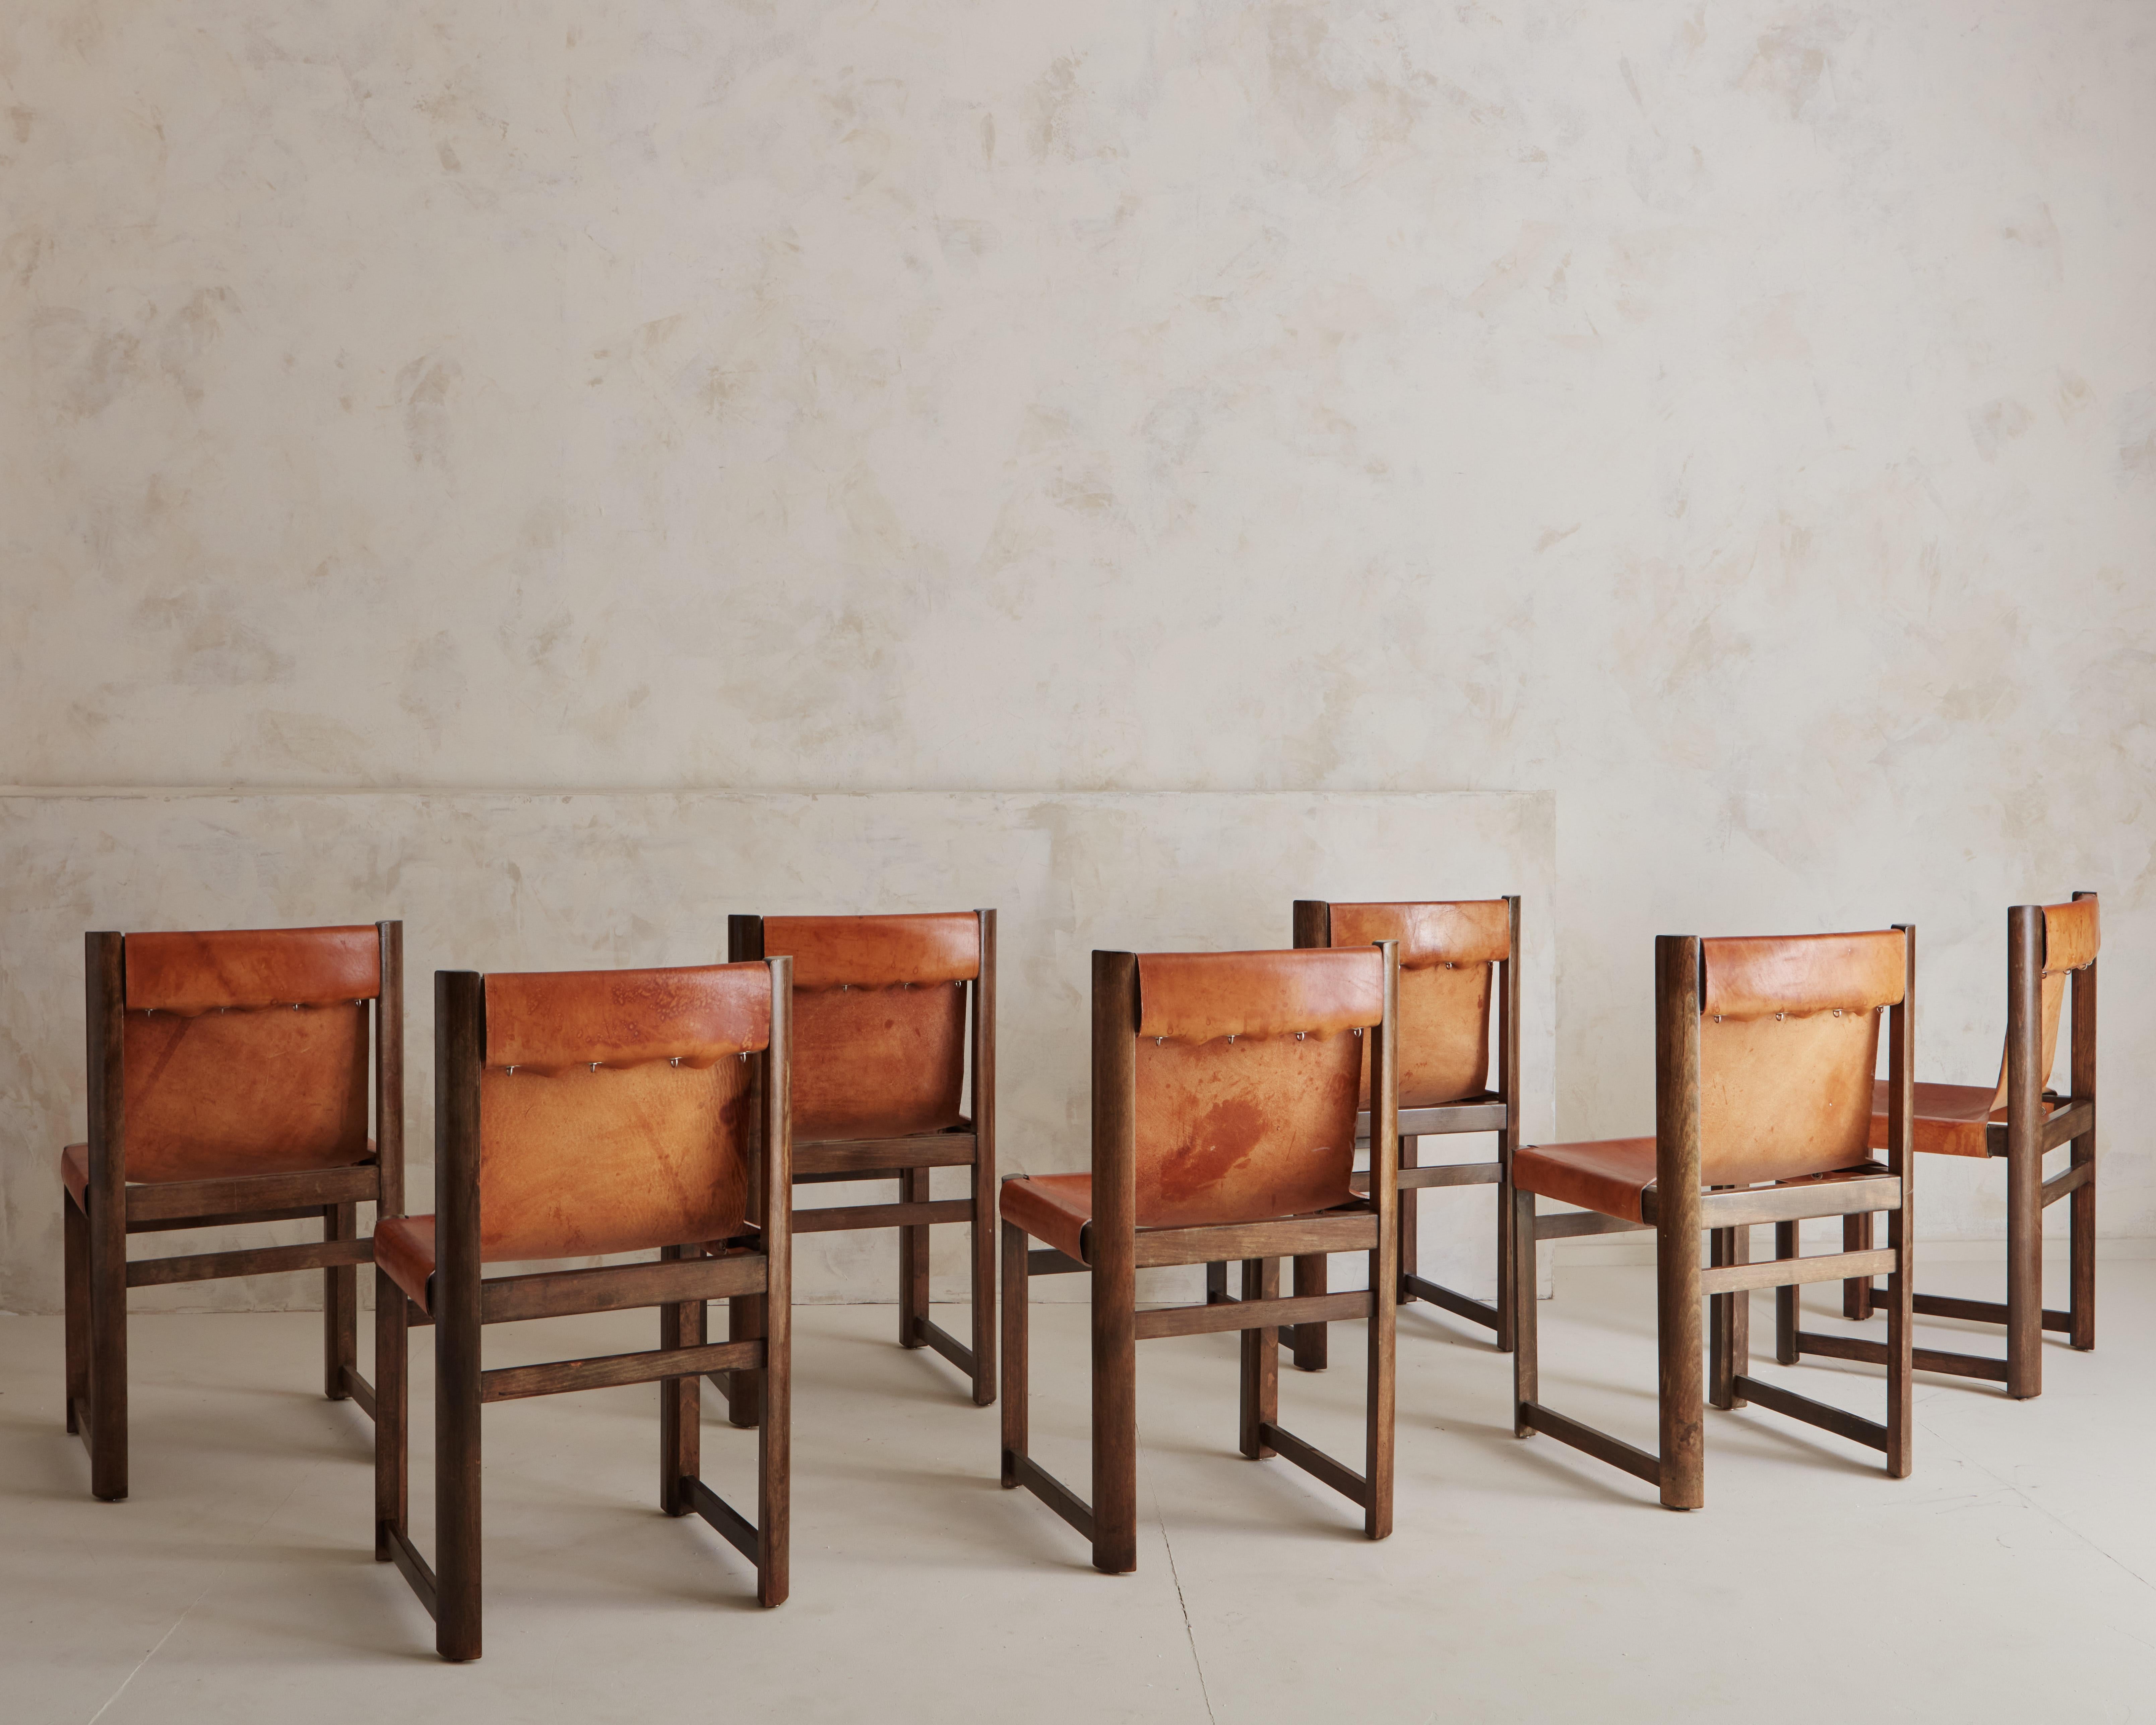 A Set of seven leather sling back chairs by Spanish interior designer and furniture maker, Jordi Vilanova. Silver locking mechanism that hold leather along the back and side of chairs add another beautiful design element. Sourced in Northern Spain.